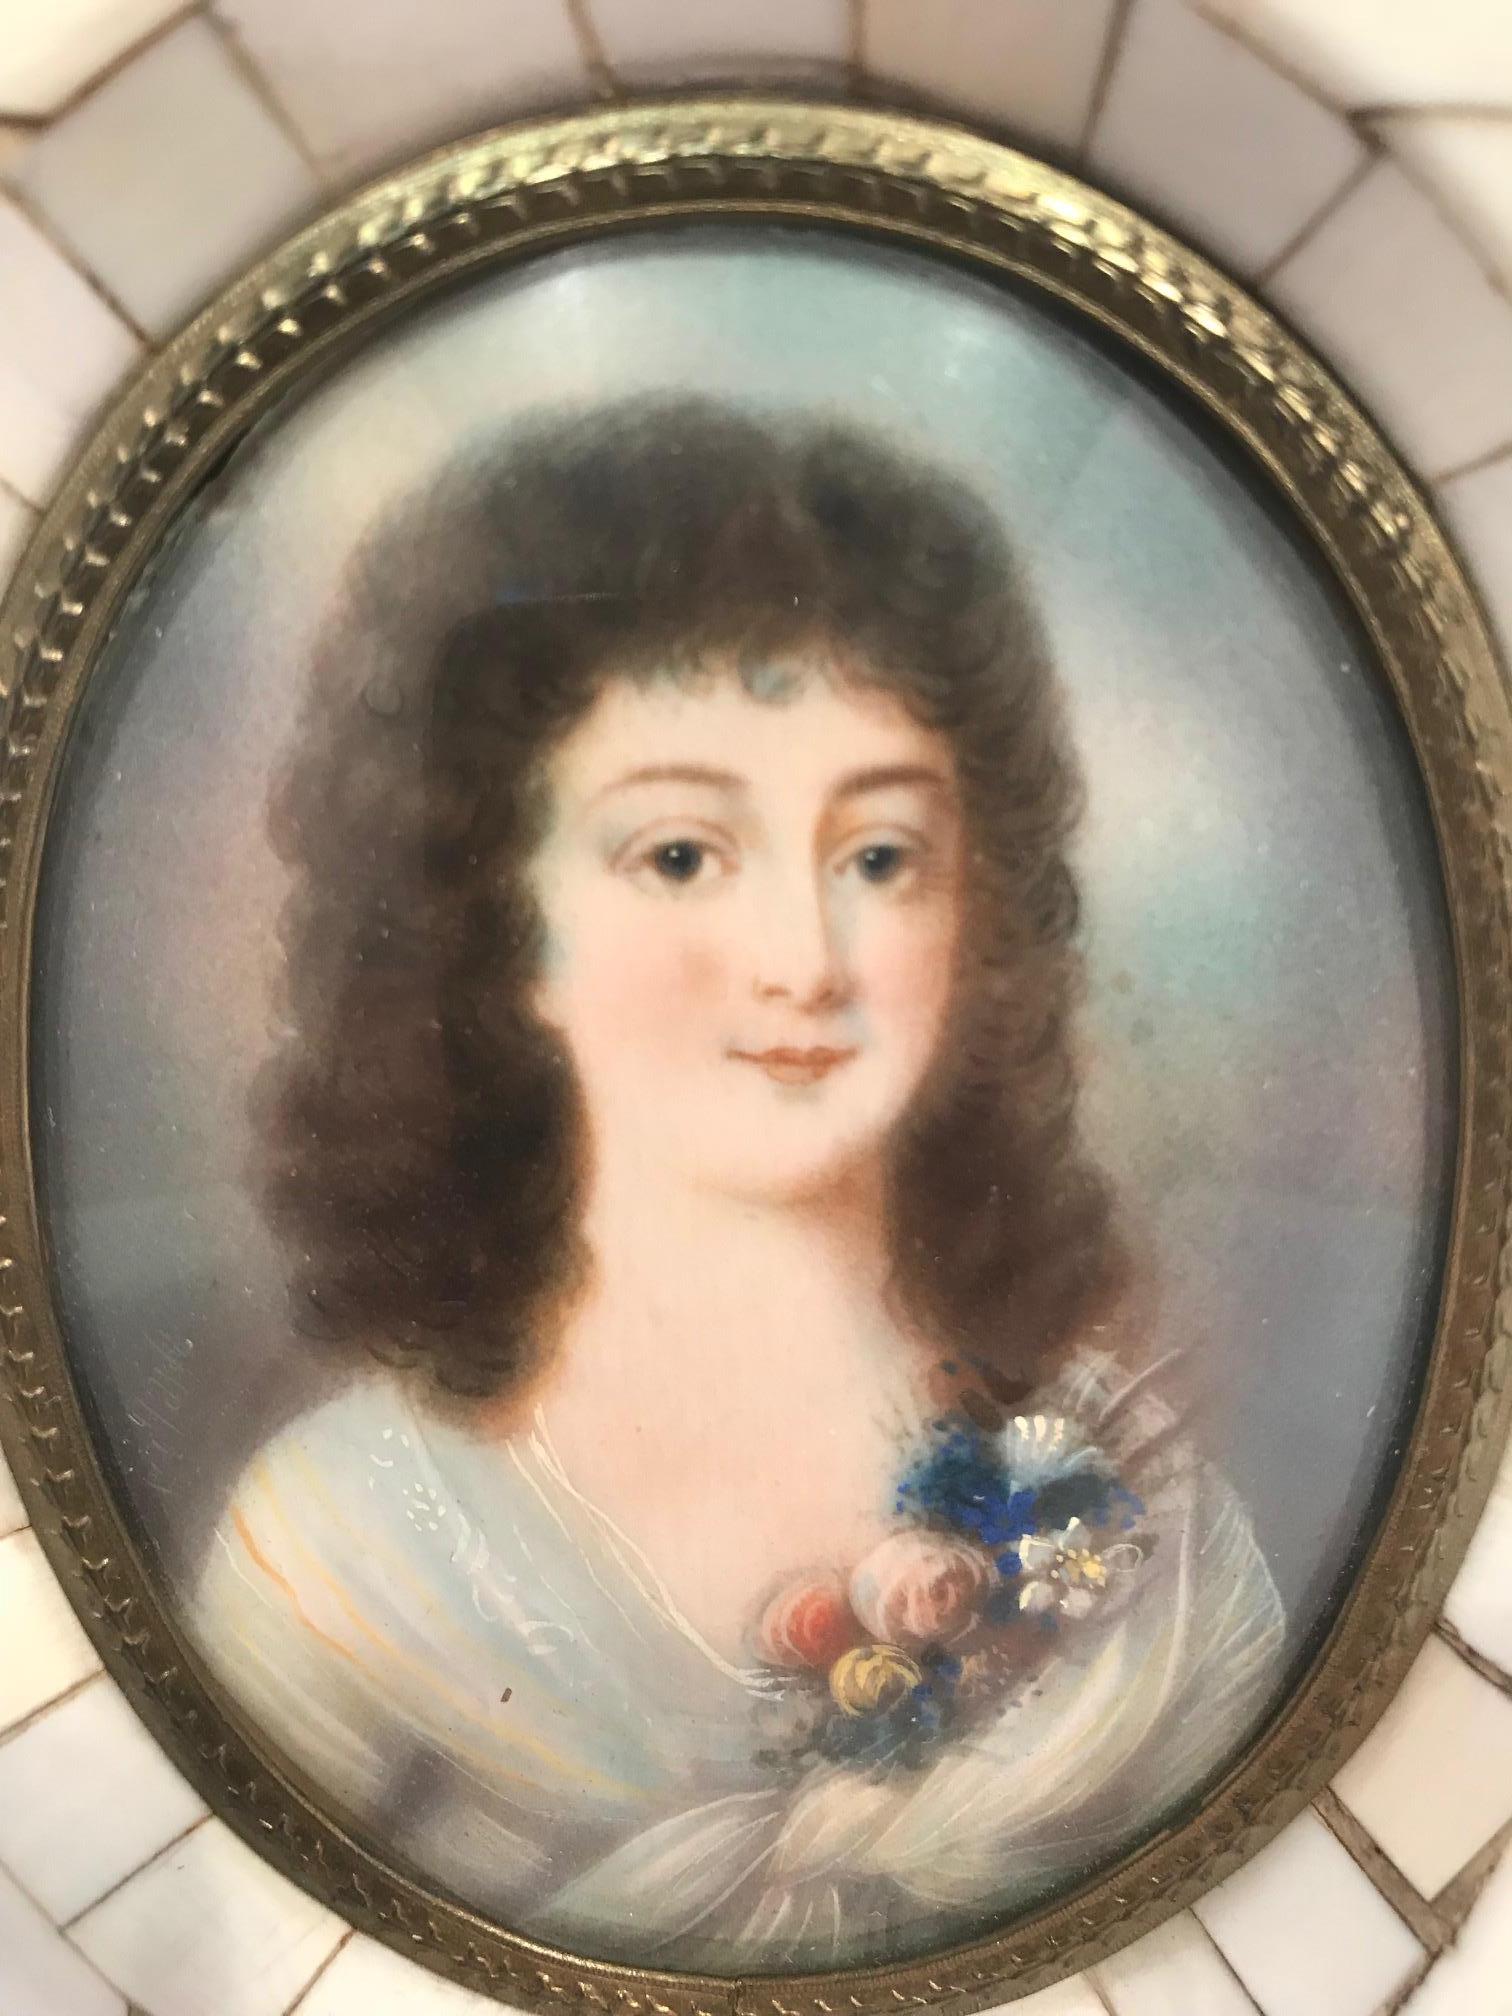 Miniature portrait of a beautiful young lady in a bone frame with a repoussé inner gilt brass filet. The portrait is hand painted on bone and retains its original crown glass.

(This item is eligible for a complimentary gift box upon request.)